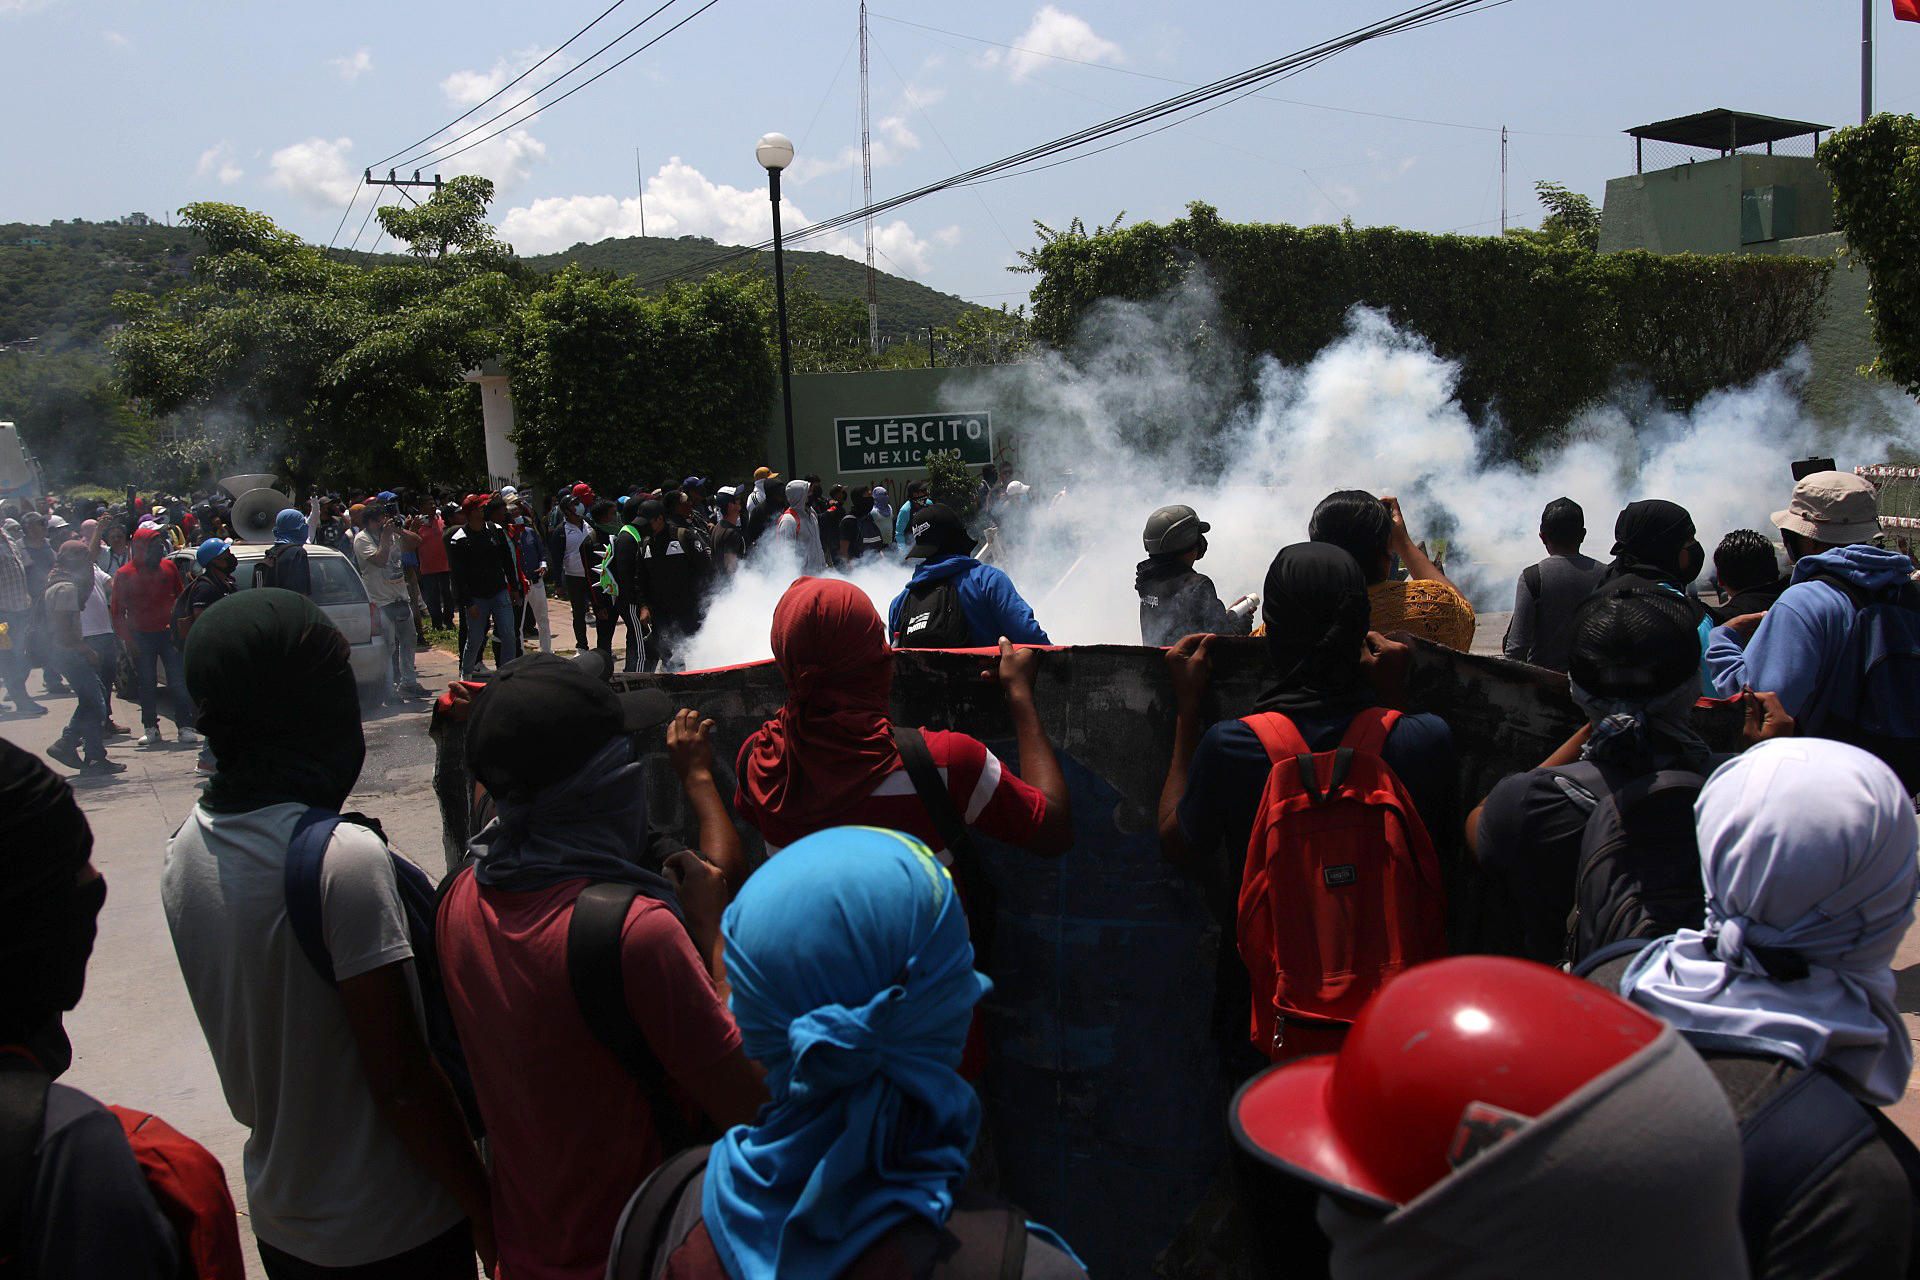 Students demonstrate today in front of a military barracks to demand justice for the 43 missing students from Ayotzinapa, in Iguala, state of Guerrero, Mexico 18 September 2023. EFE/Jose Luis de la Cruz